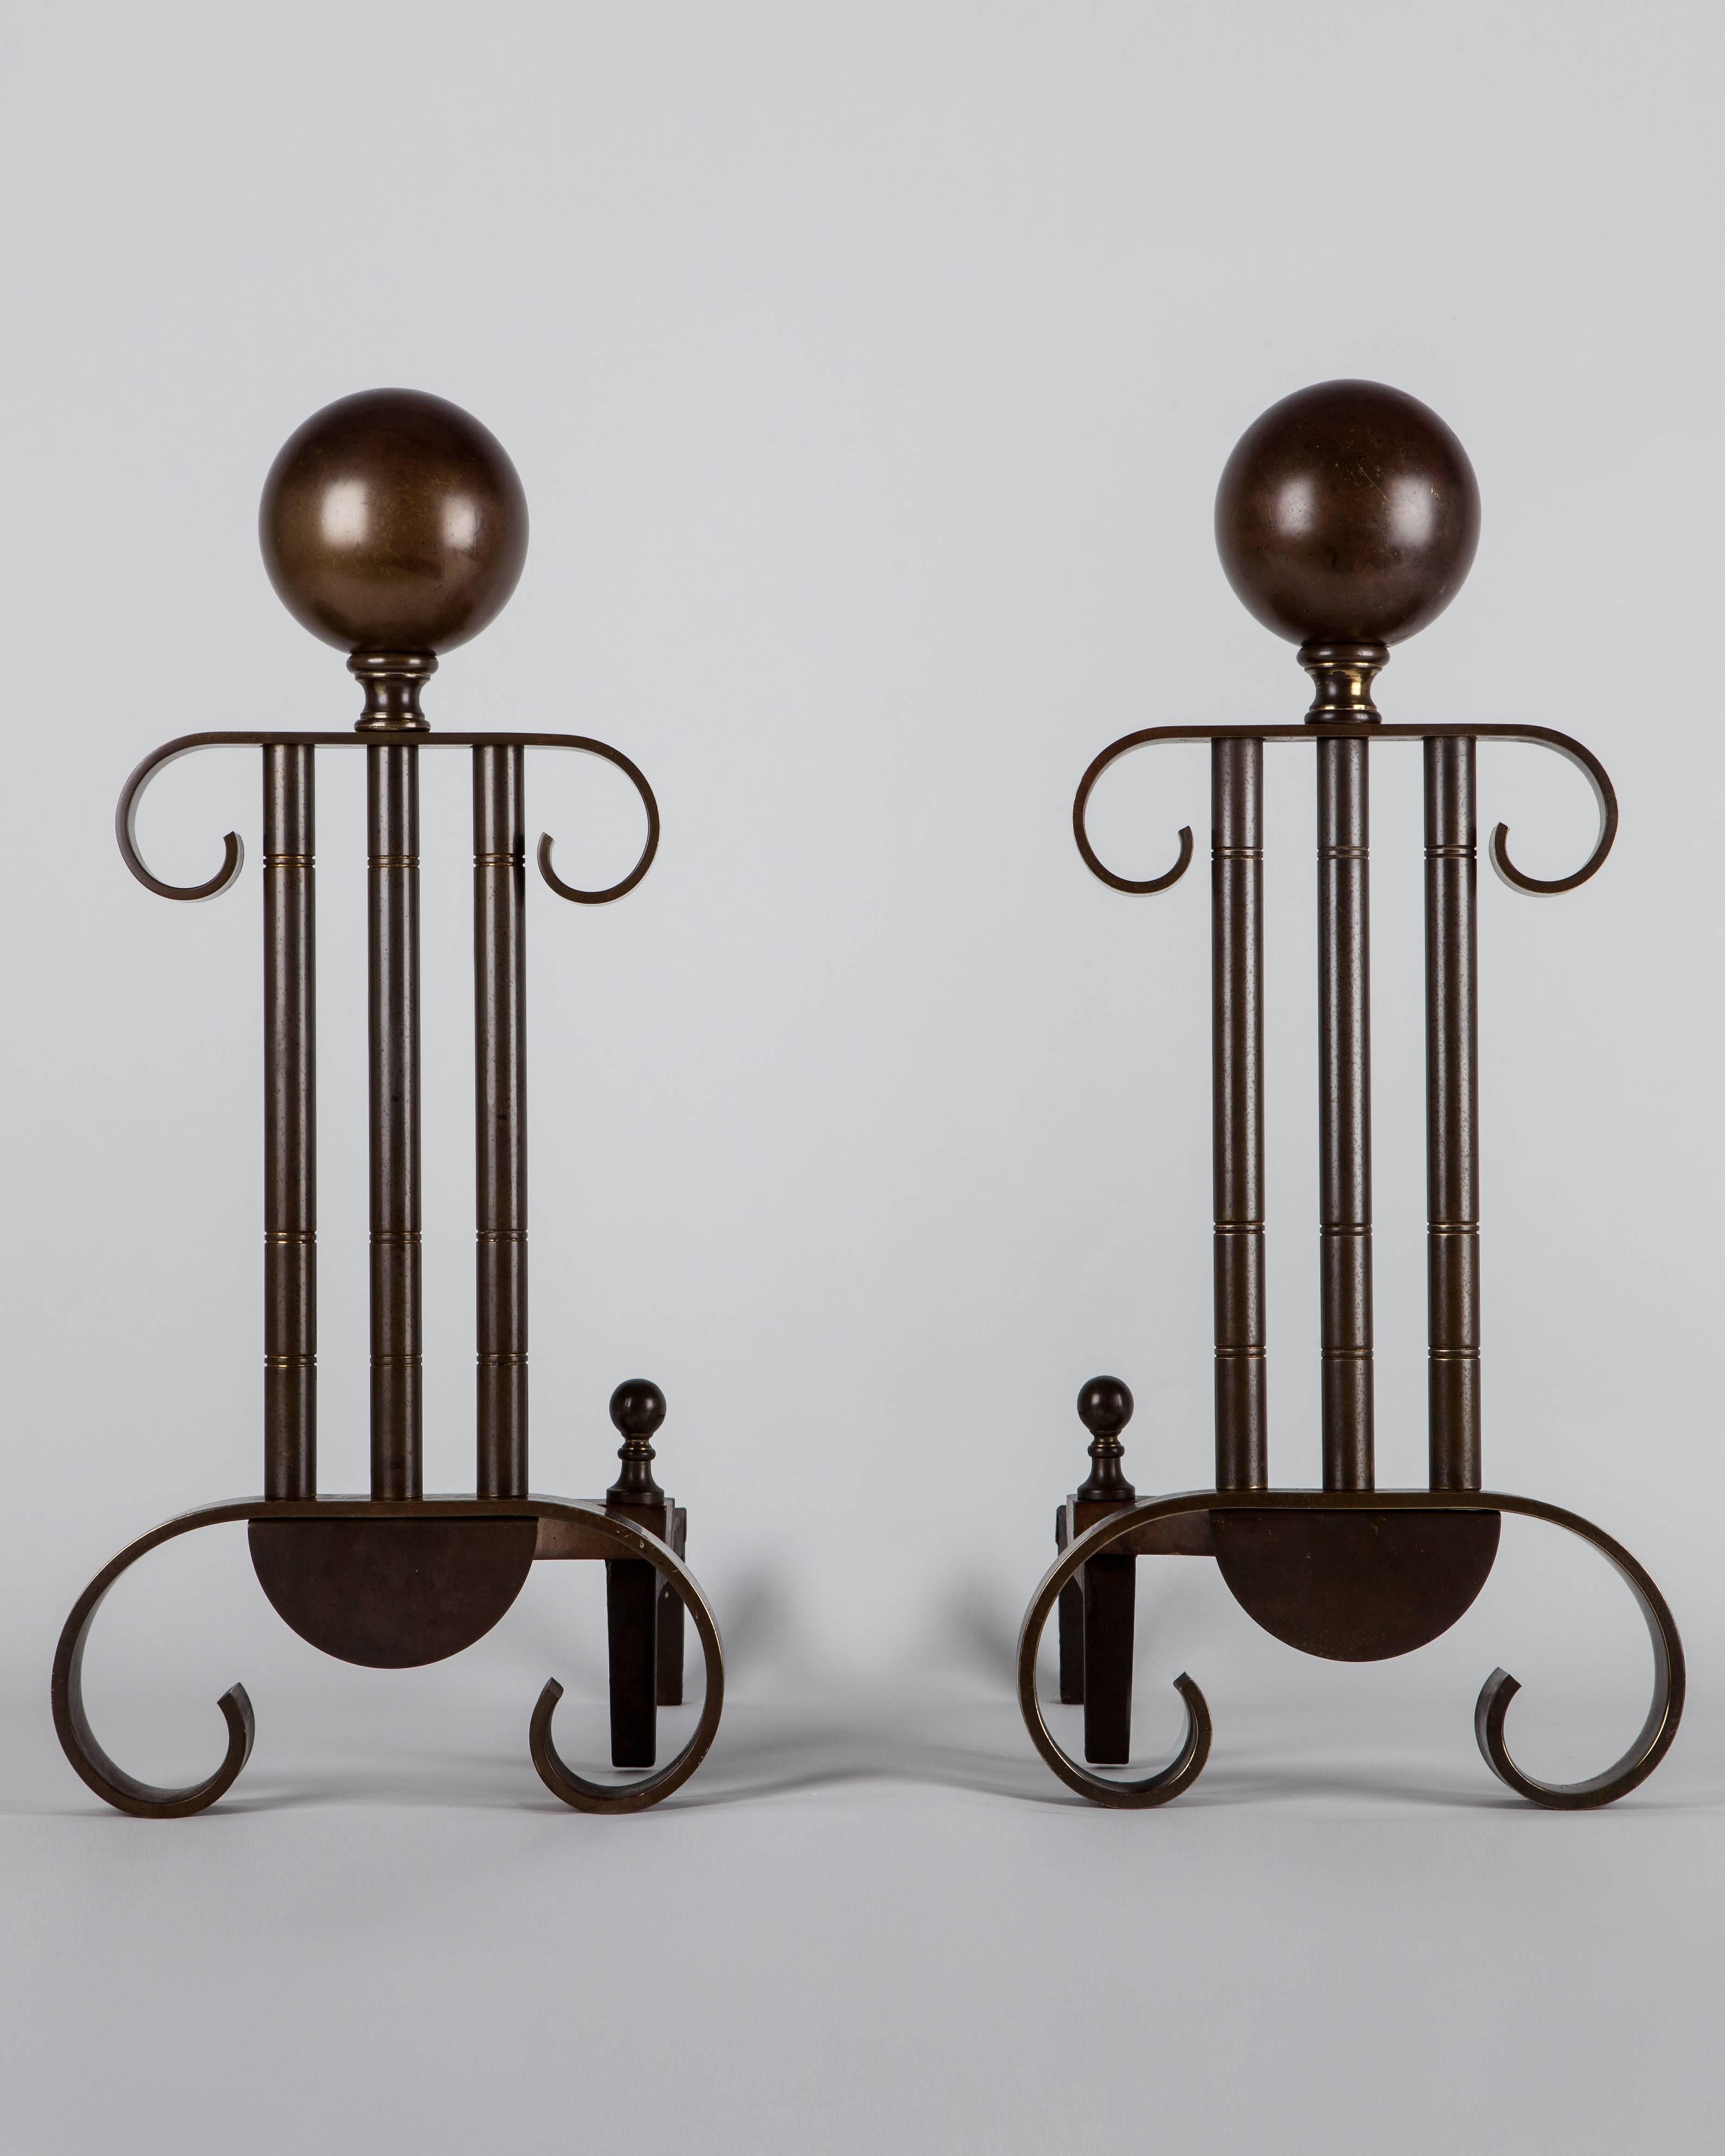 AFP0520
A pair of vintage andirons in the stylized neoclassical form of fluted ionic columns, surmounted by large spheres. In their original age-darkened brass finish.

Dimensions:
Overall: 20-1/2